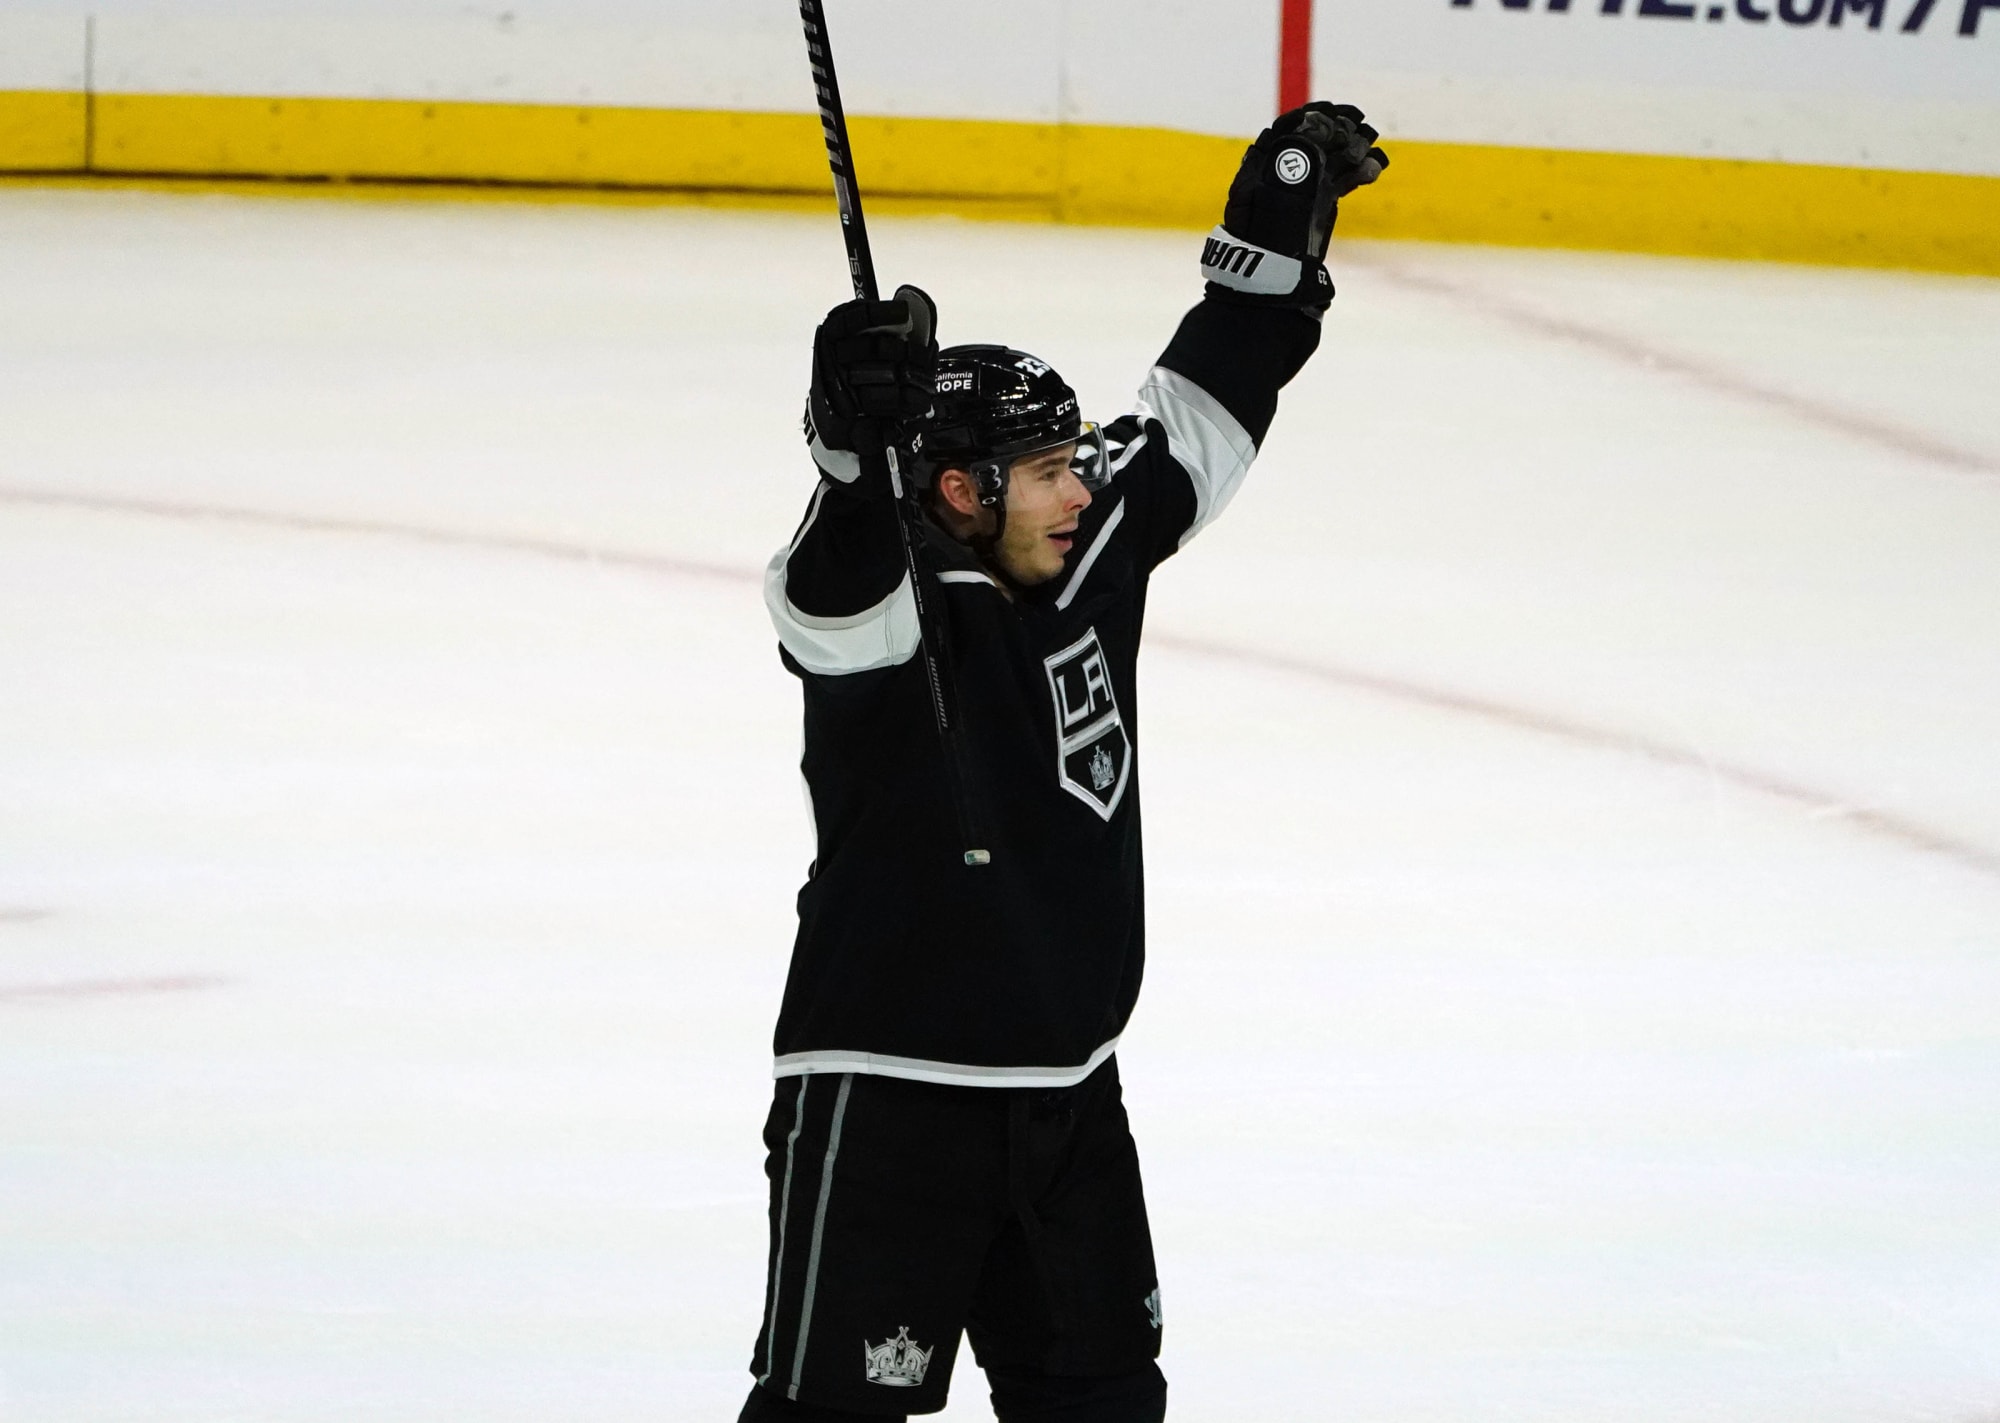 The LA Kings Honor Dustin Brown with an Immersive WebAR Experience